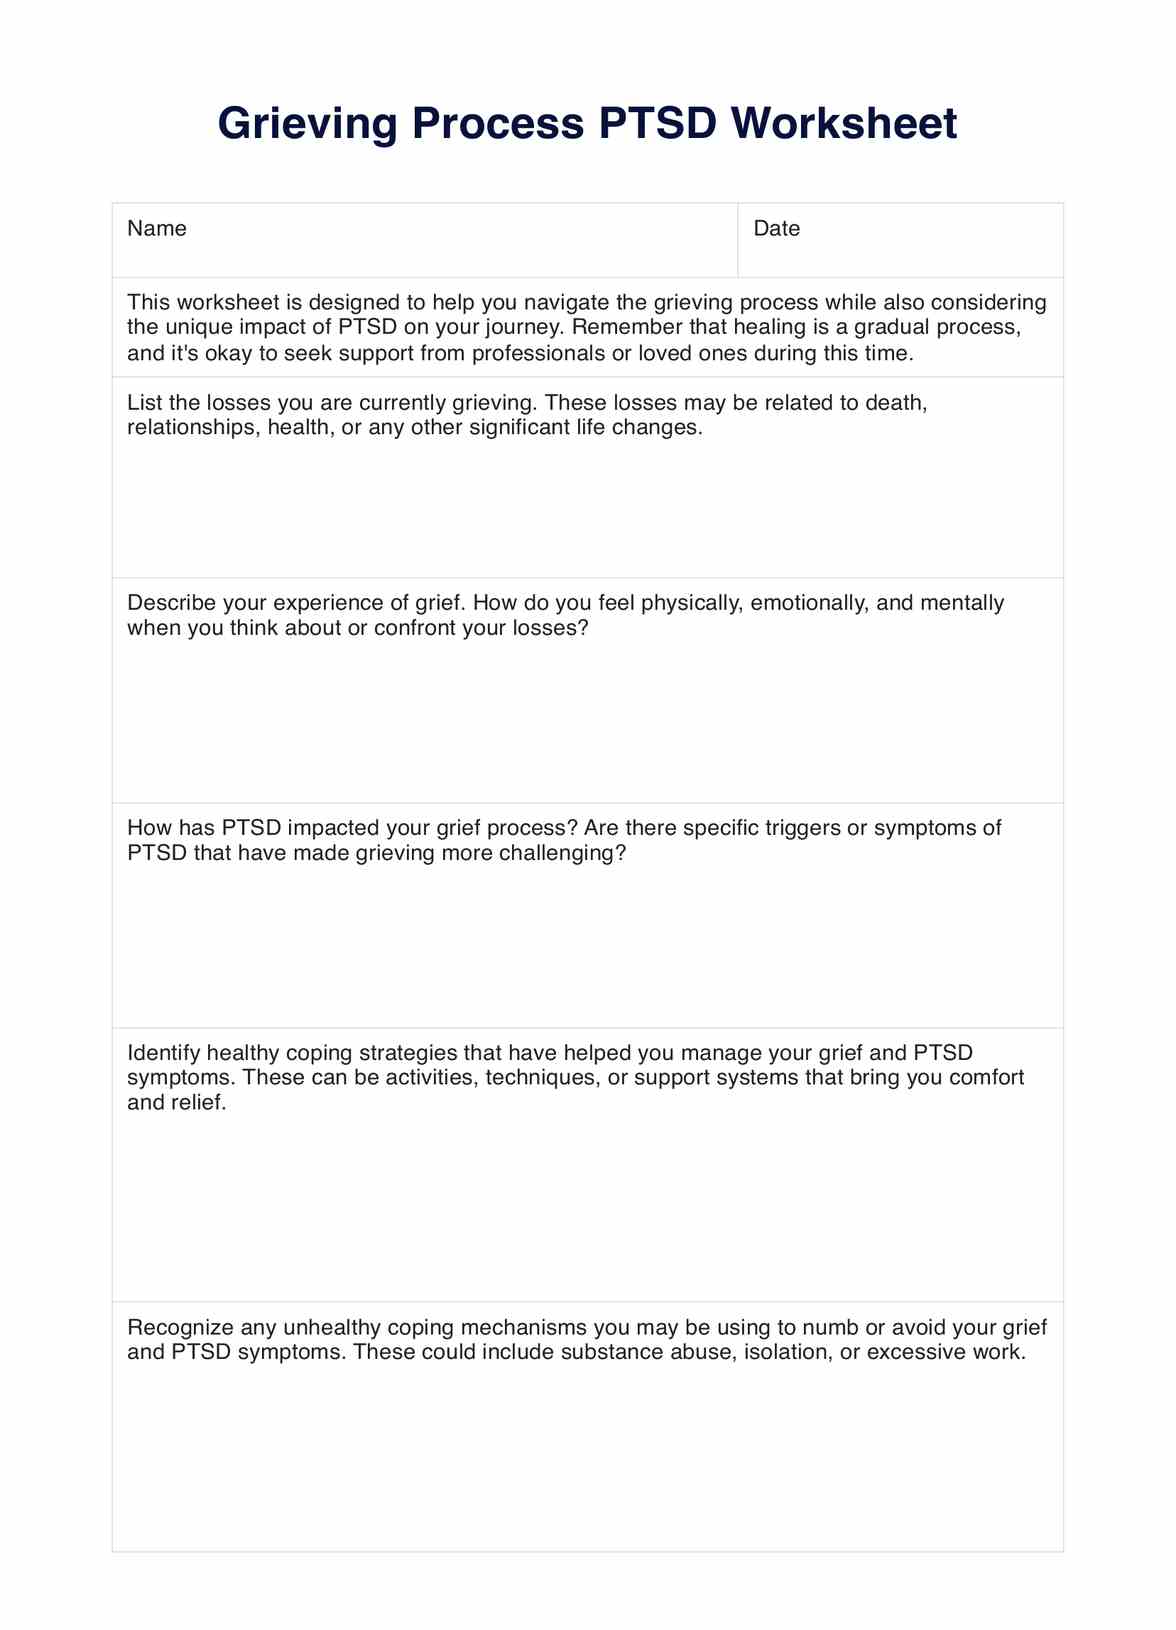 Grieving Process PTSD Worksheets PDF Example